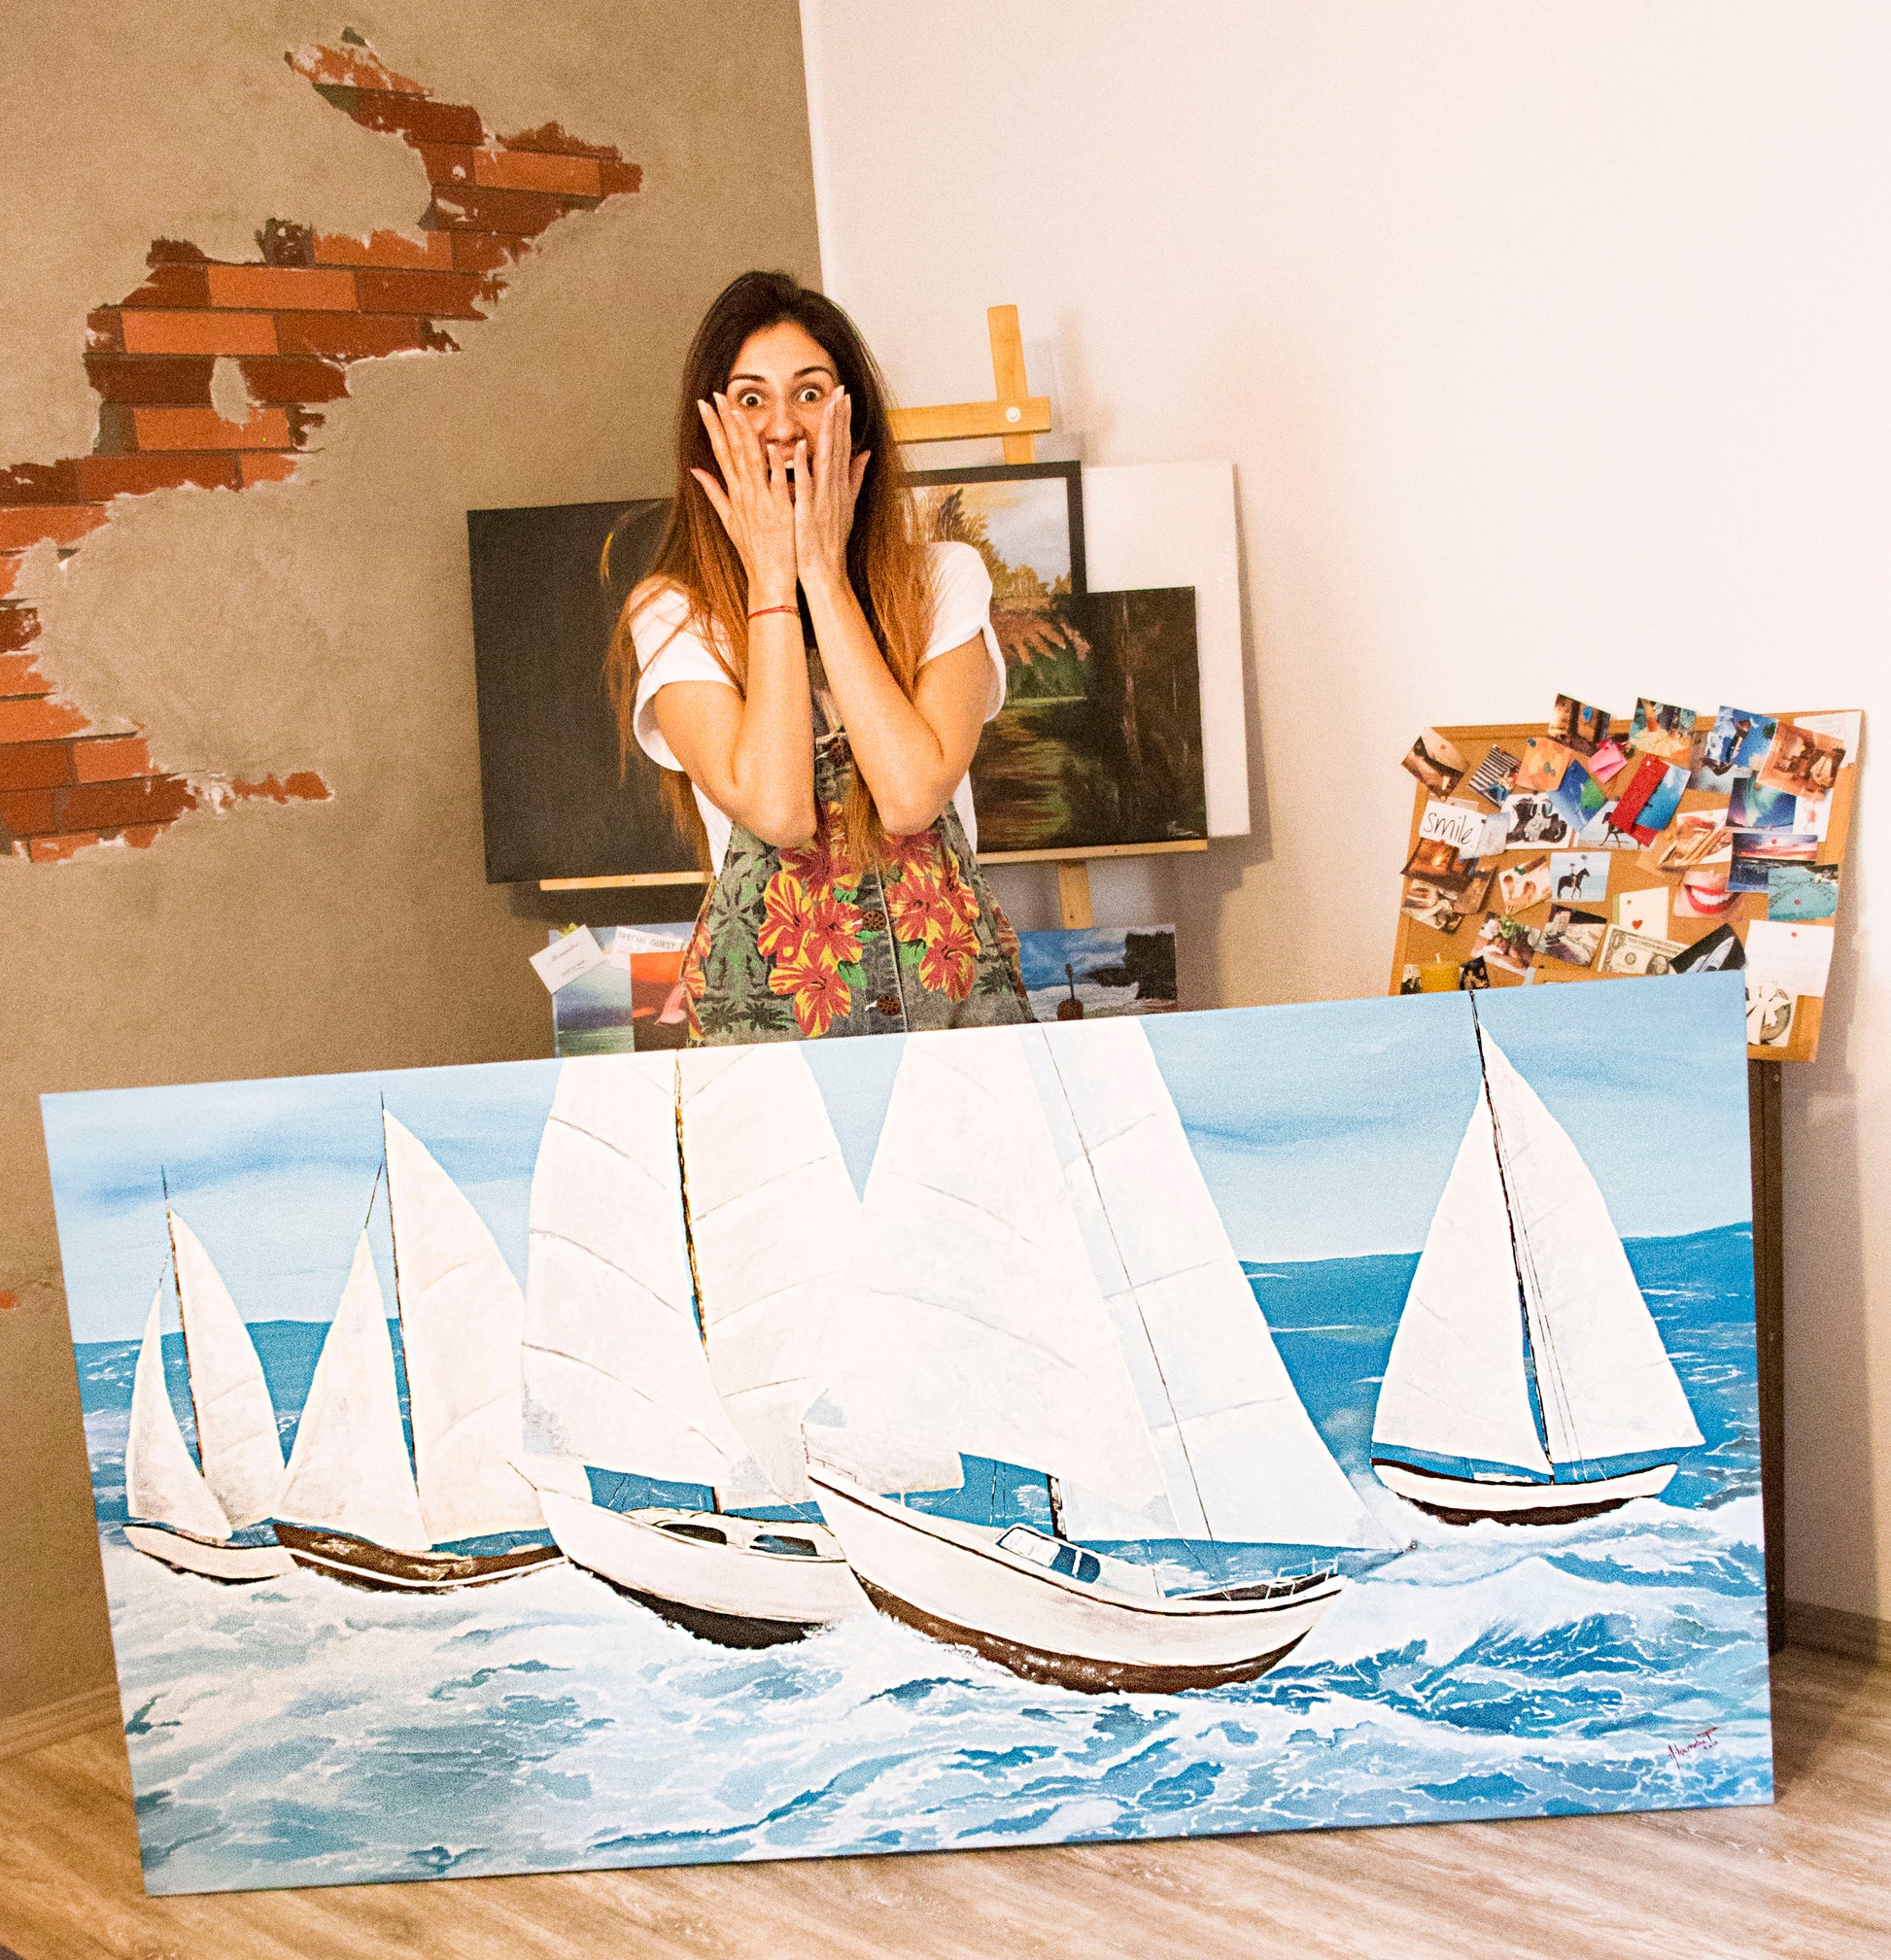 acrylic on canvas, pictura barci, vapoare, barca cu panze, sailing boats painting, sea painting, fishing painting, seagulls painting